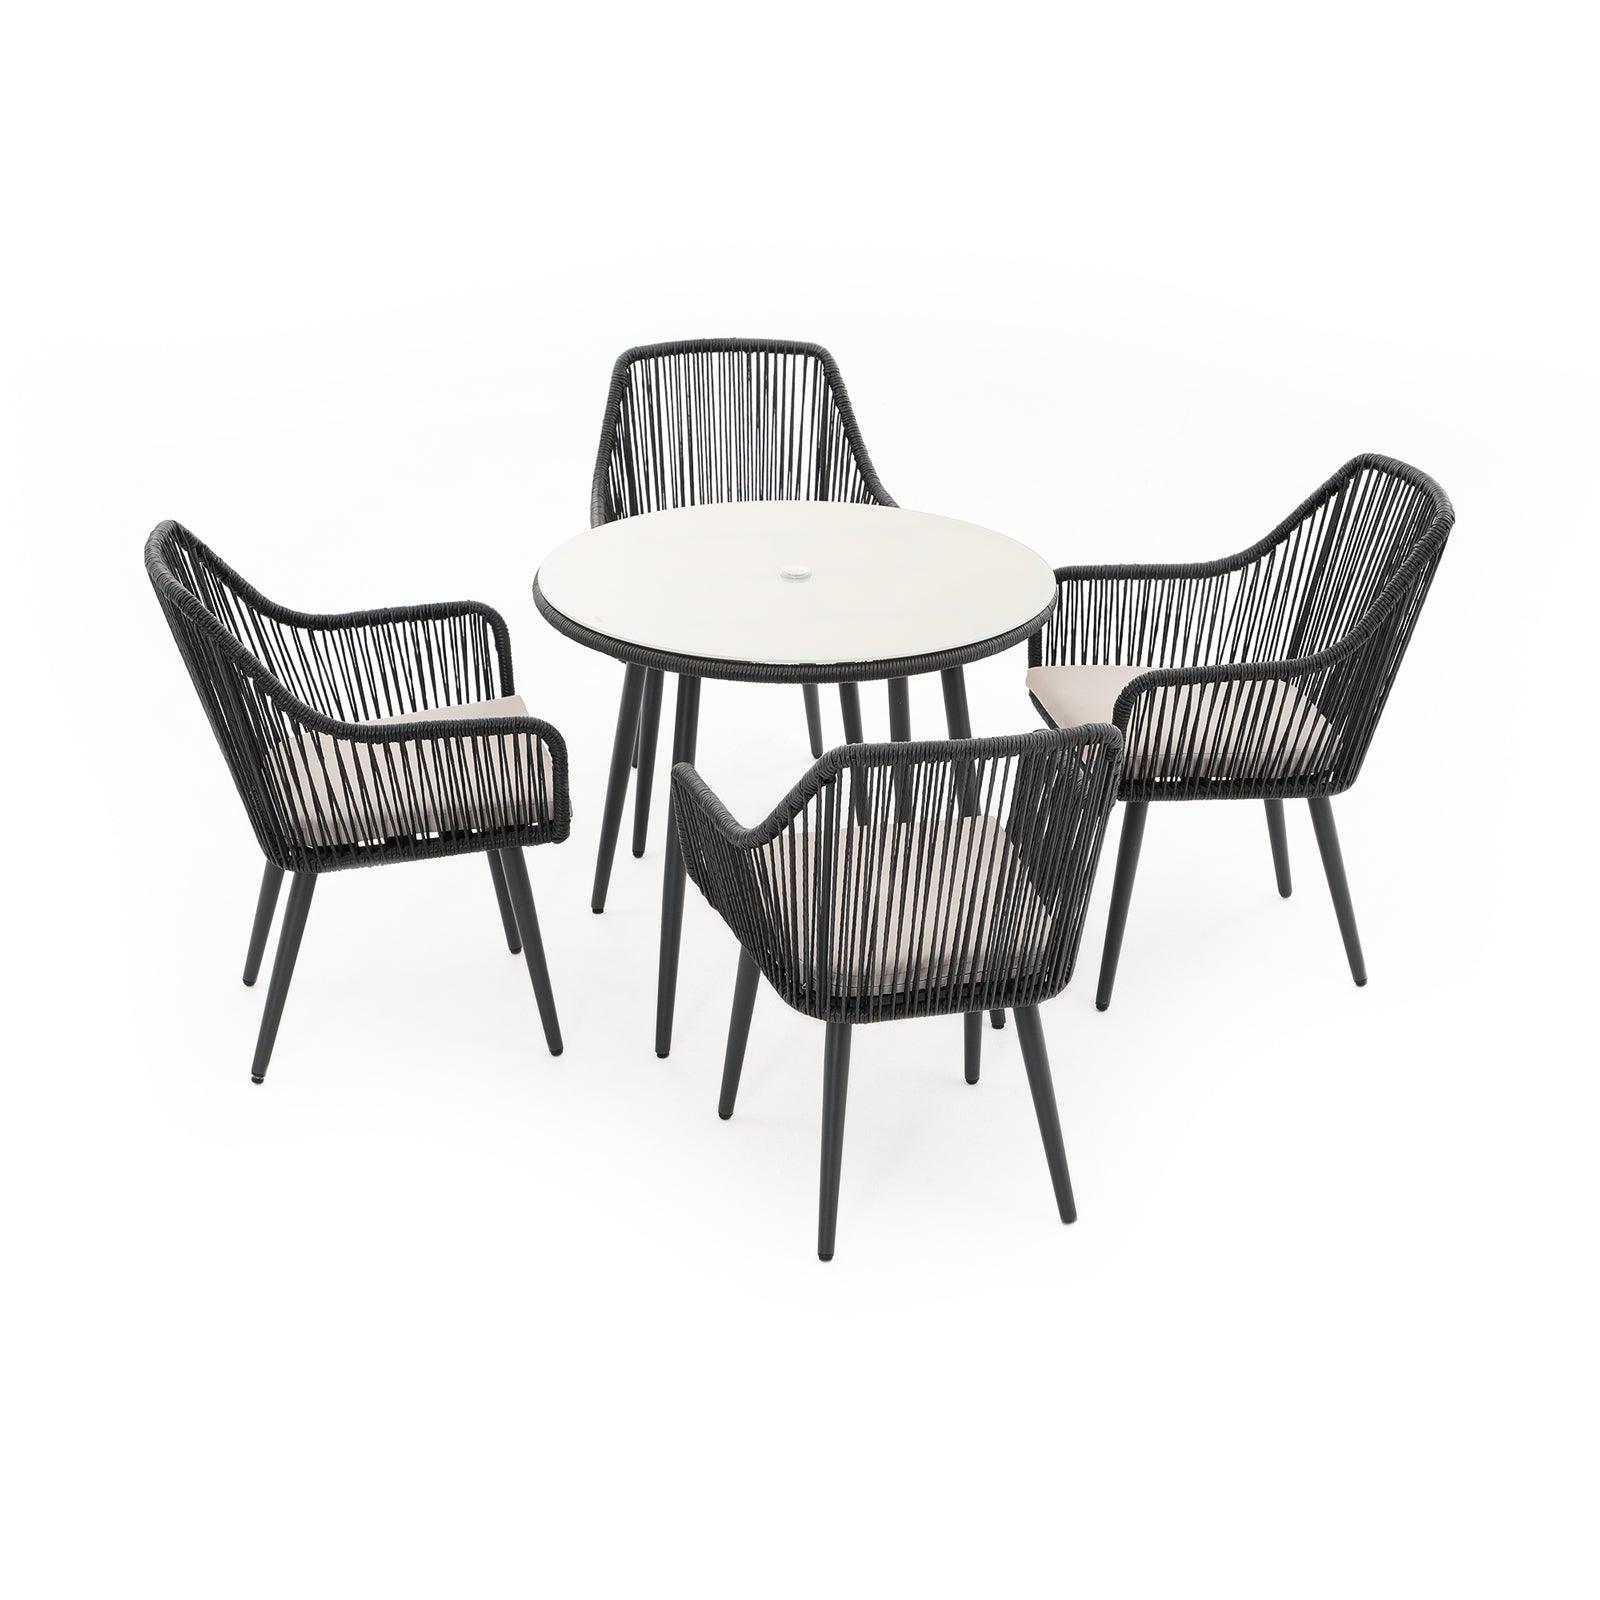 Hallerbos black 5-piece outdoor Dining Set with steel frame, beige cushion, 1 Round Dining Table, 4 dining chairs - Jardina Furniture - 1#Color_Black